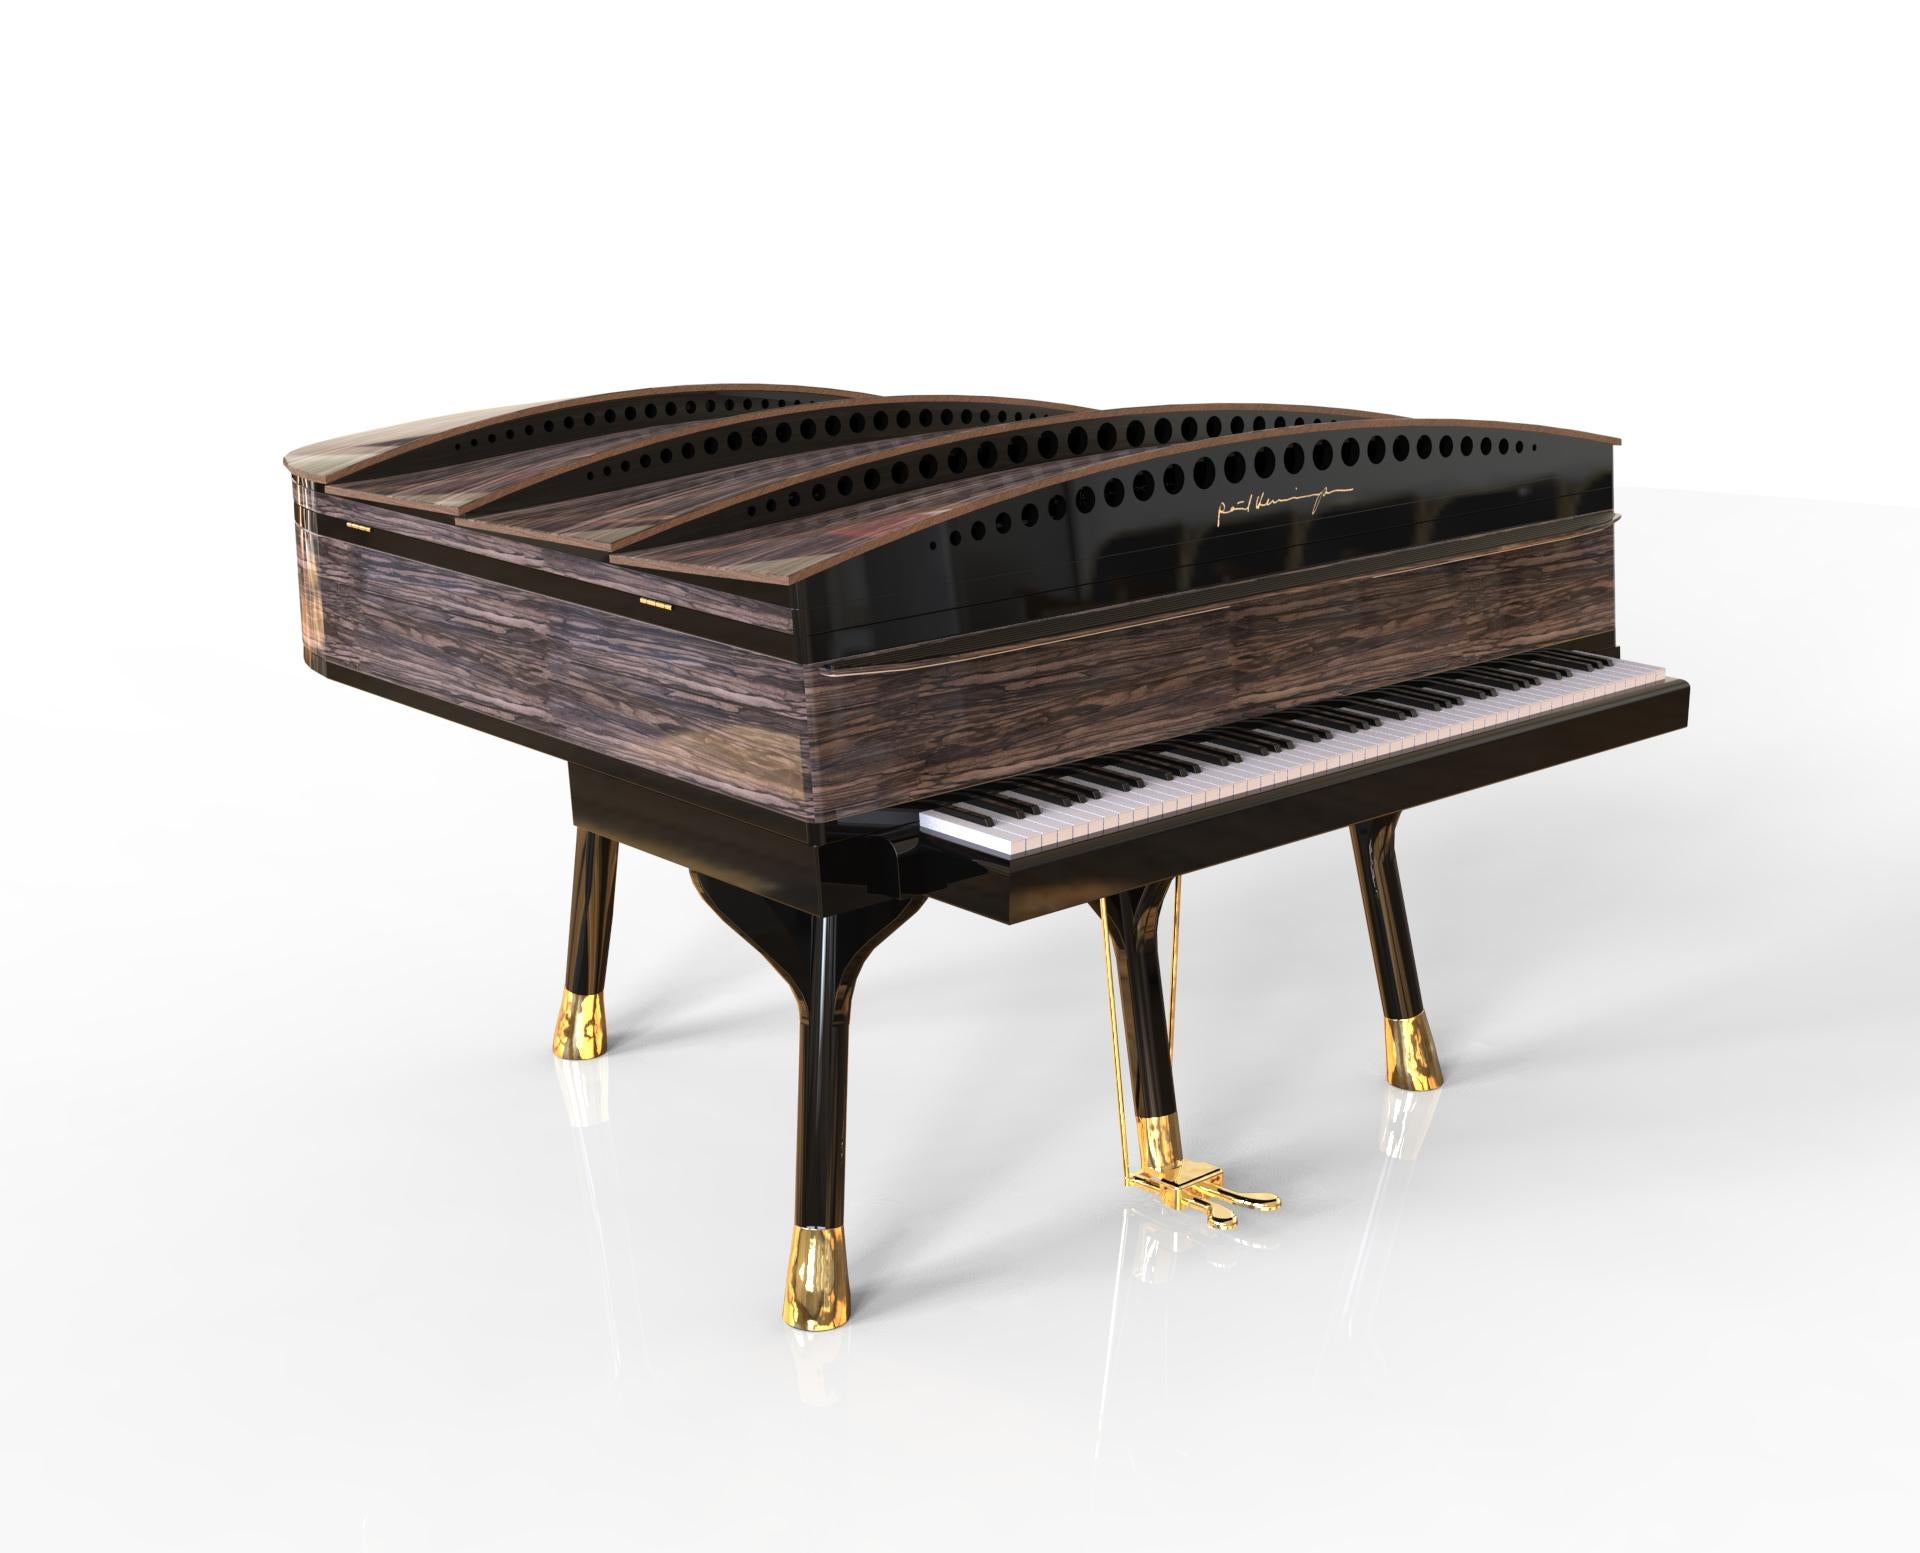 - All prices are listed ex works.
- 5 year guarantee.
- We regularly crate, ship and install PH Pianos worldwide with full insurance.

Inside and Out, A Masterful Work of Art
This PH Bow Grand Piano Curated Edition is an exquisite instrument